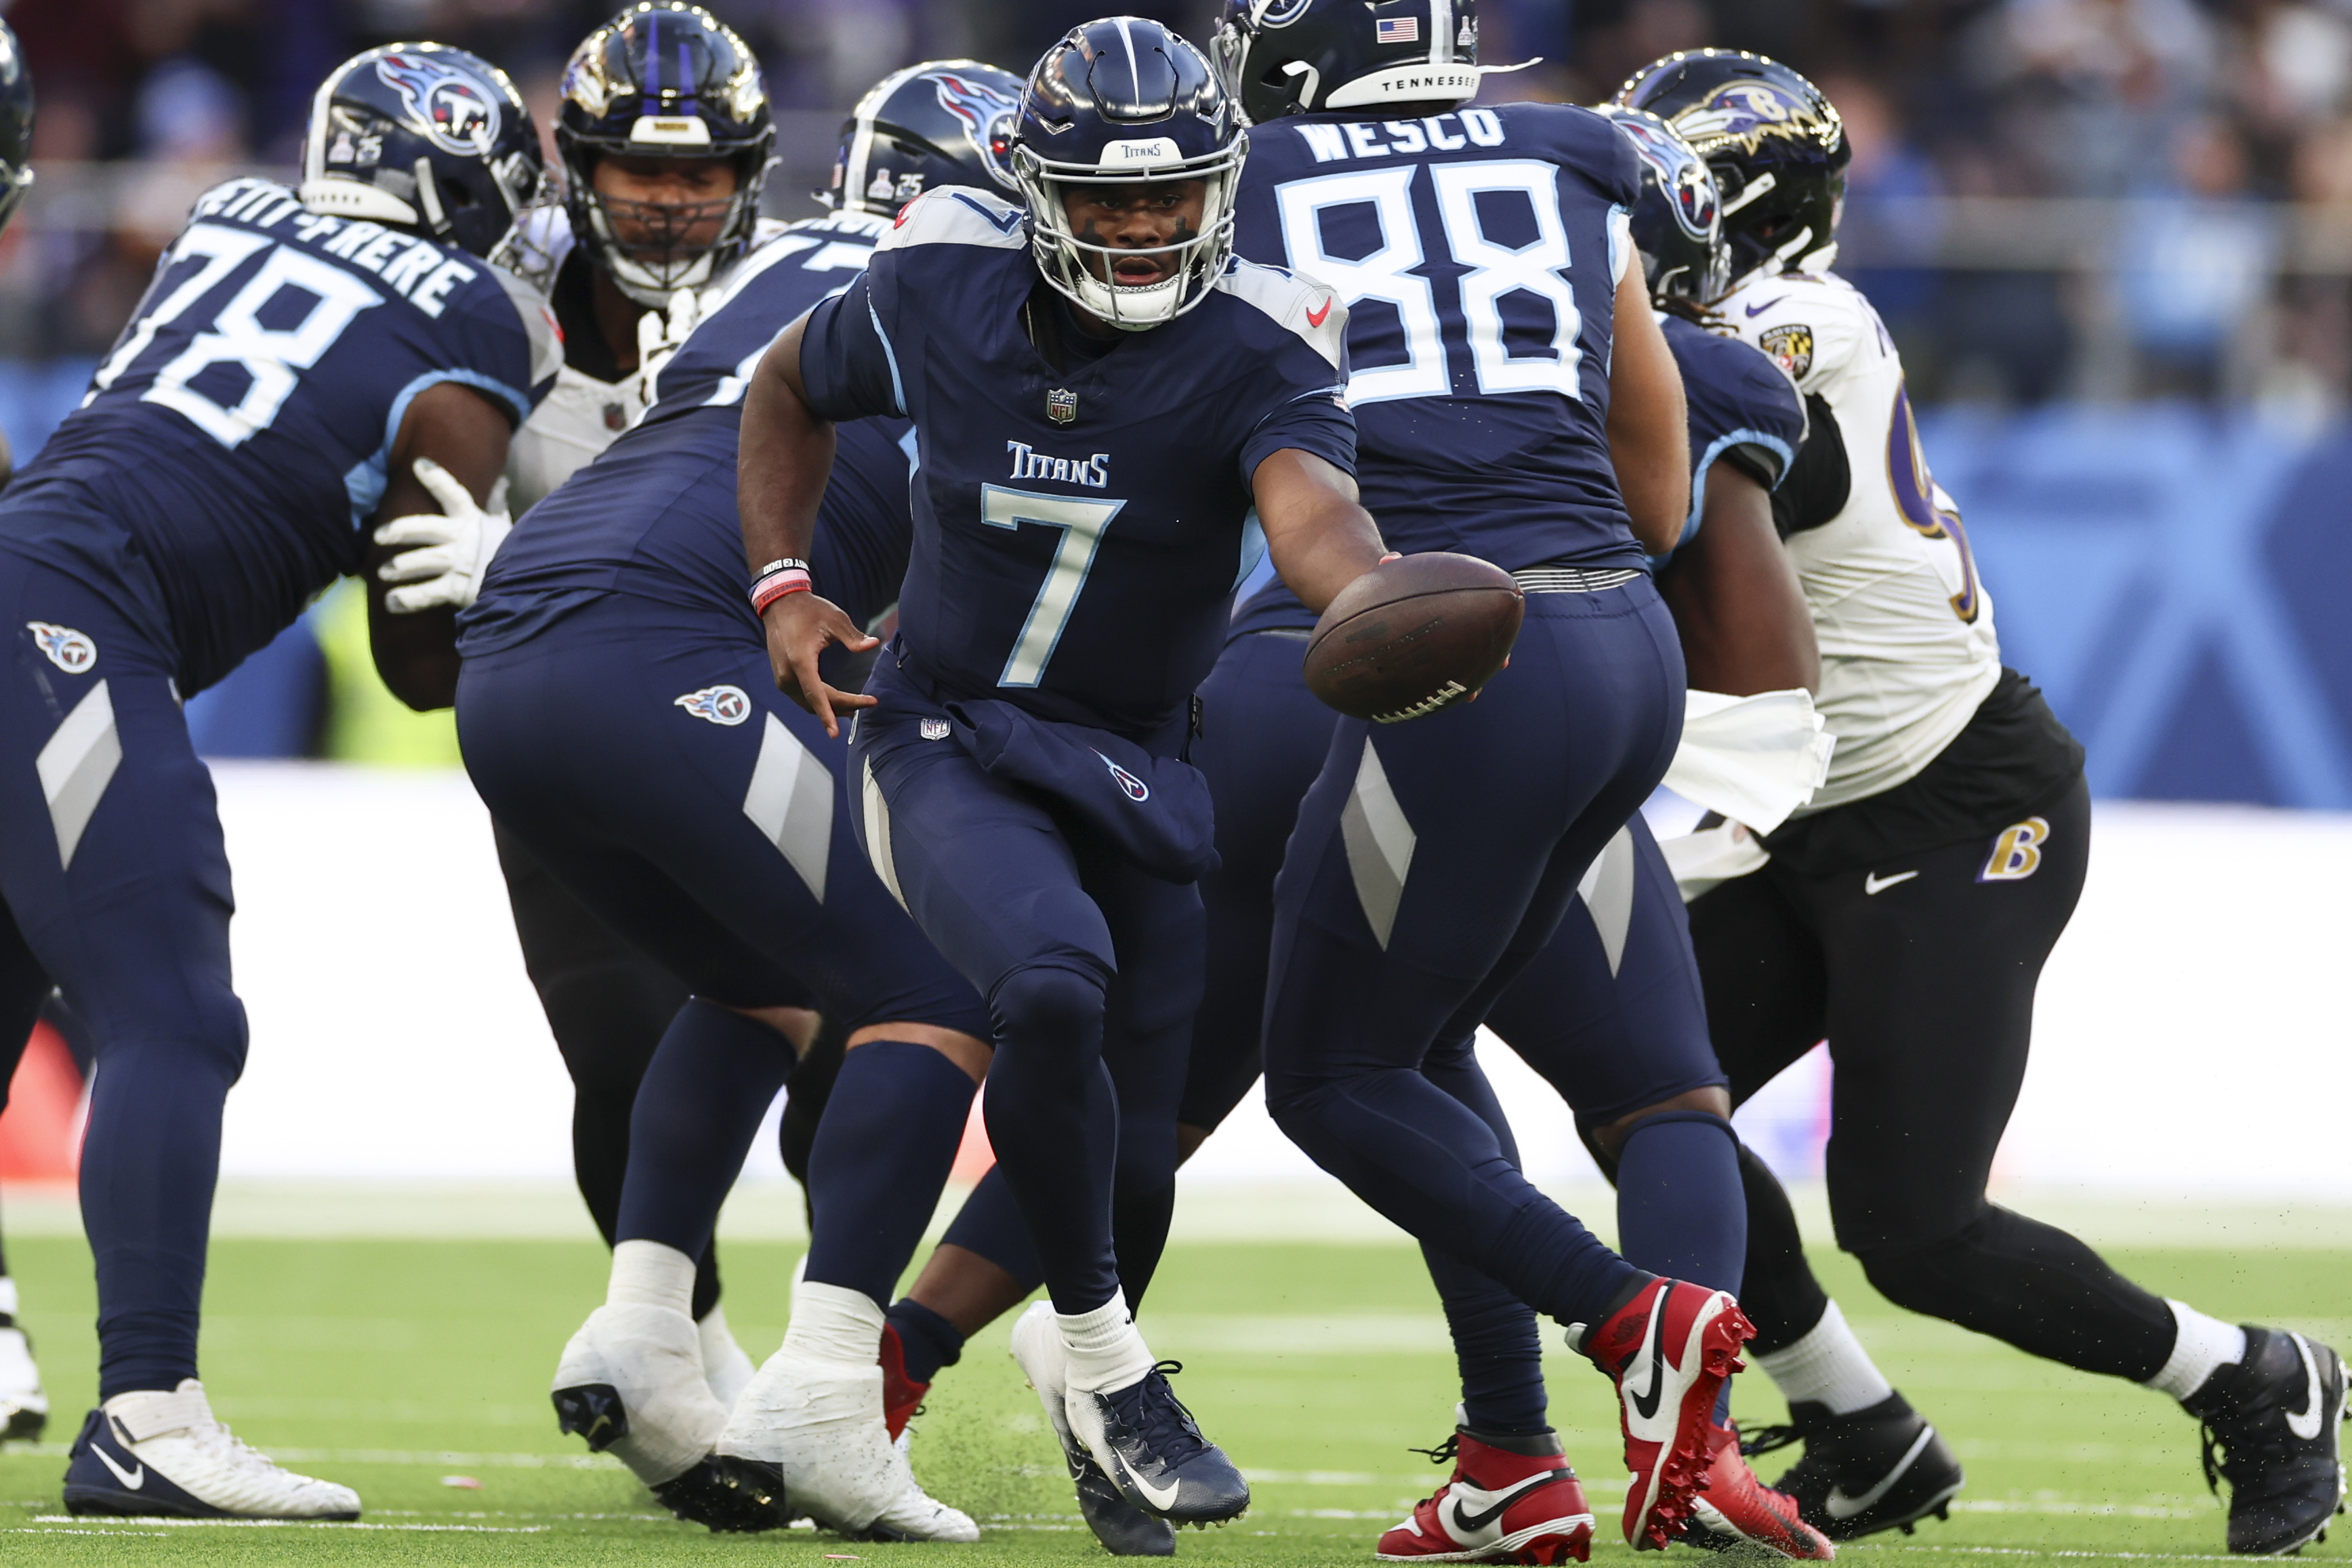 Tennessee Titans uniforms ranked in bottom half of NFL